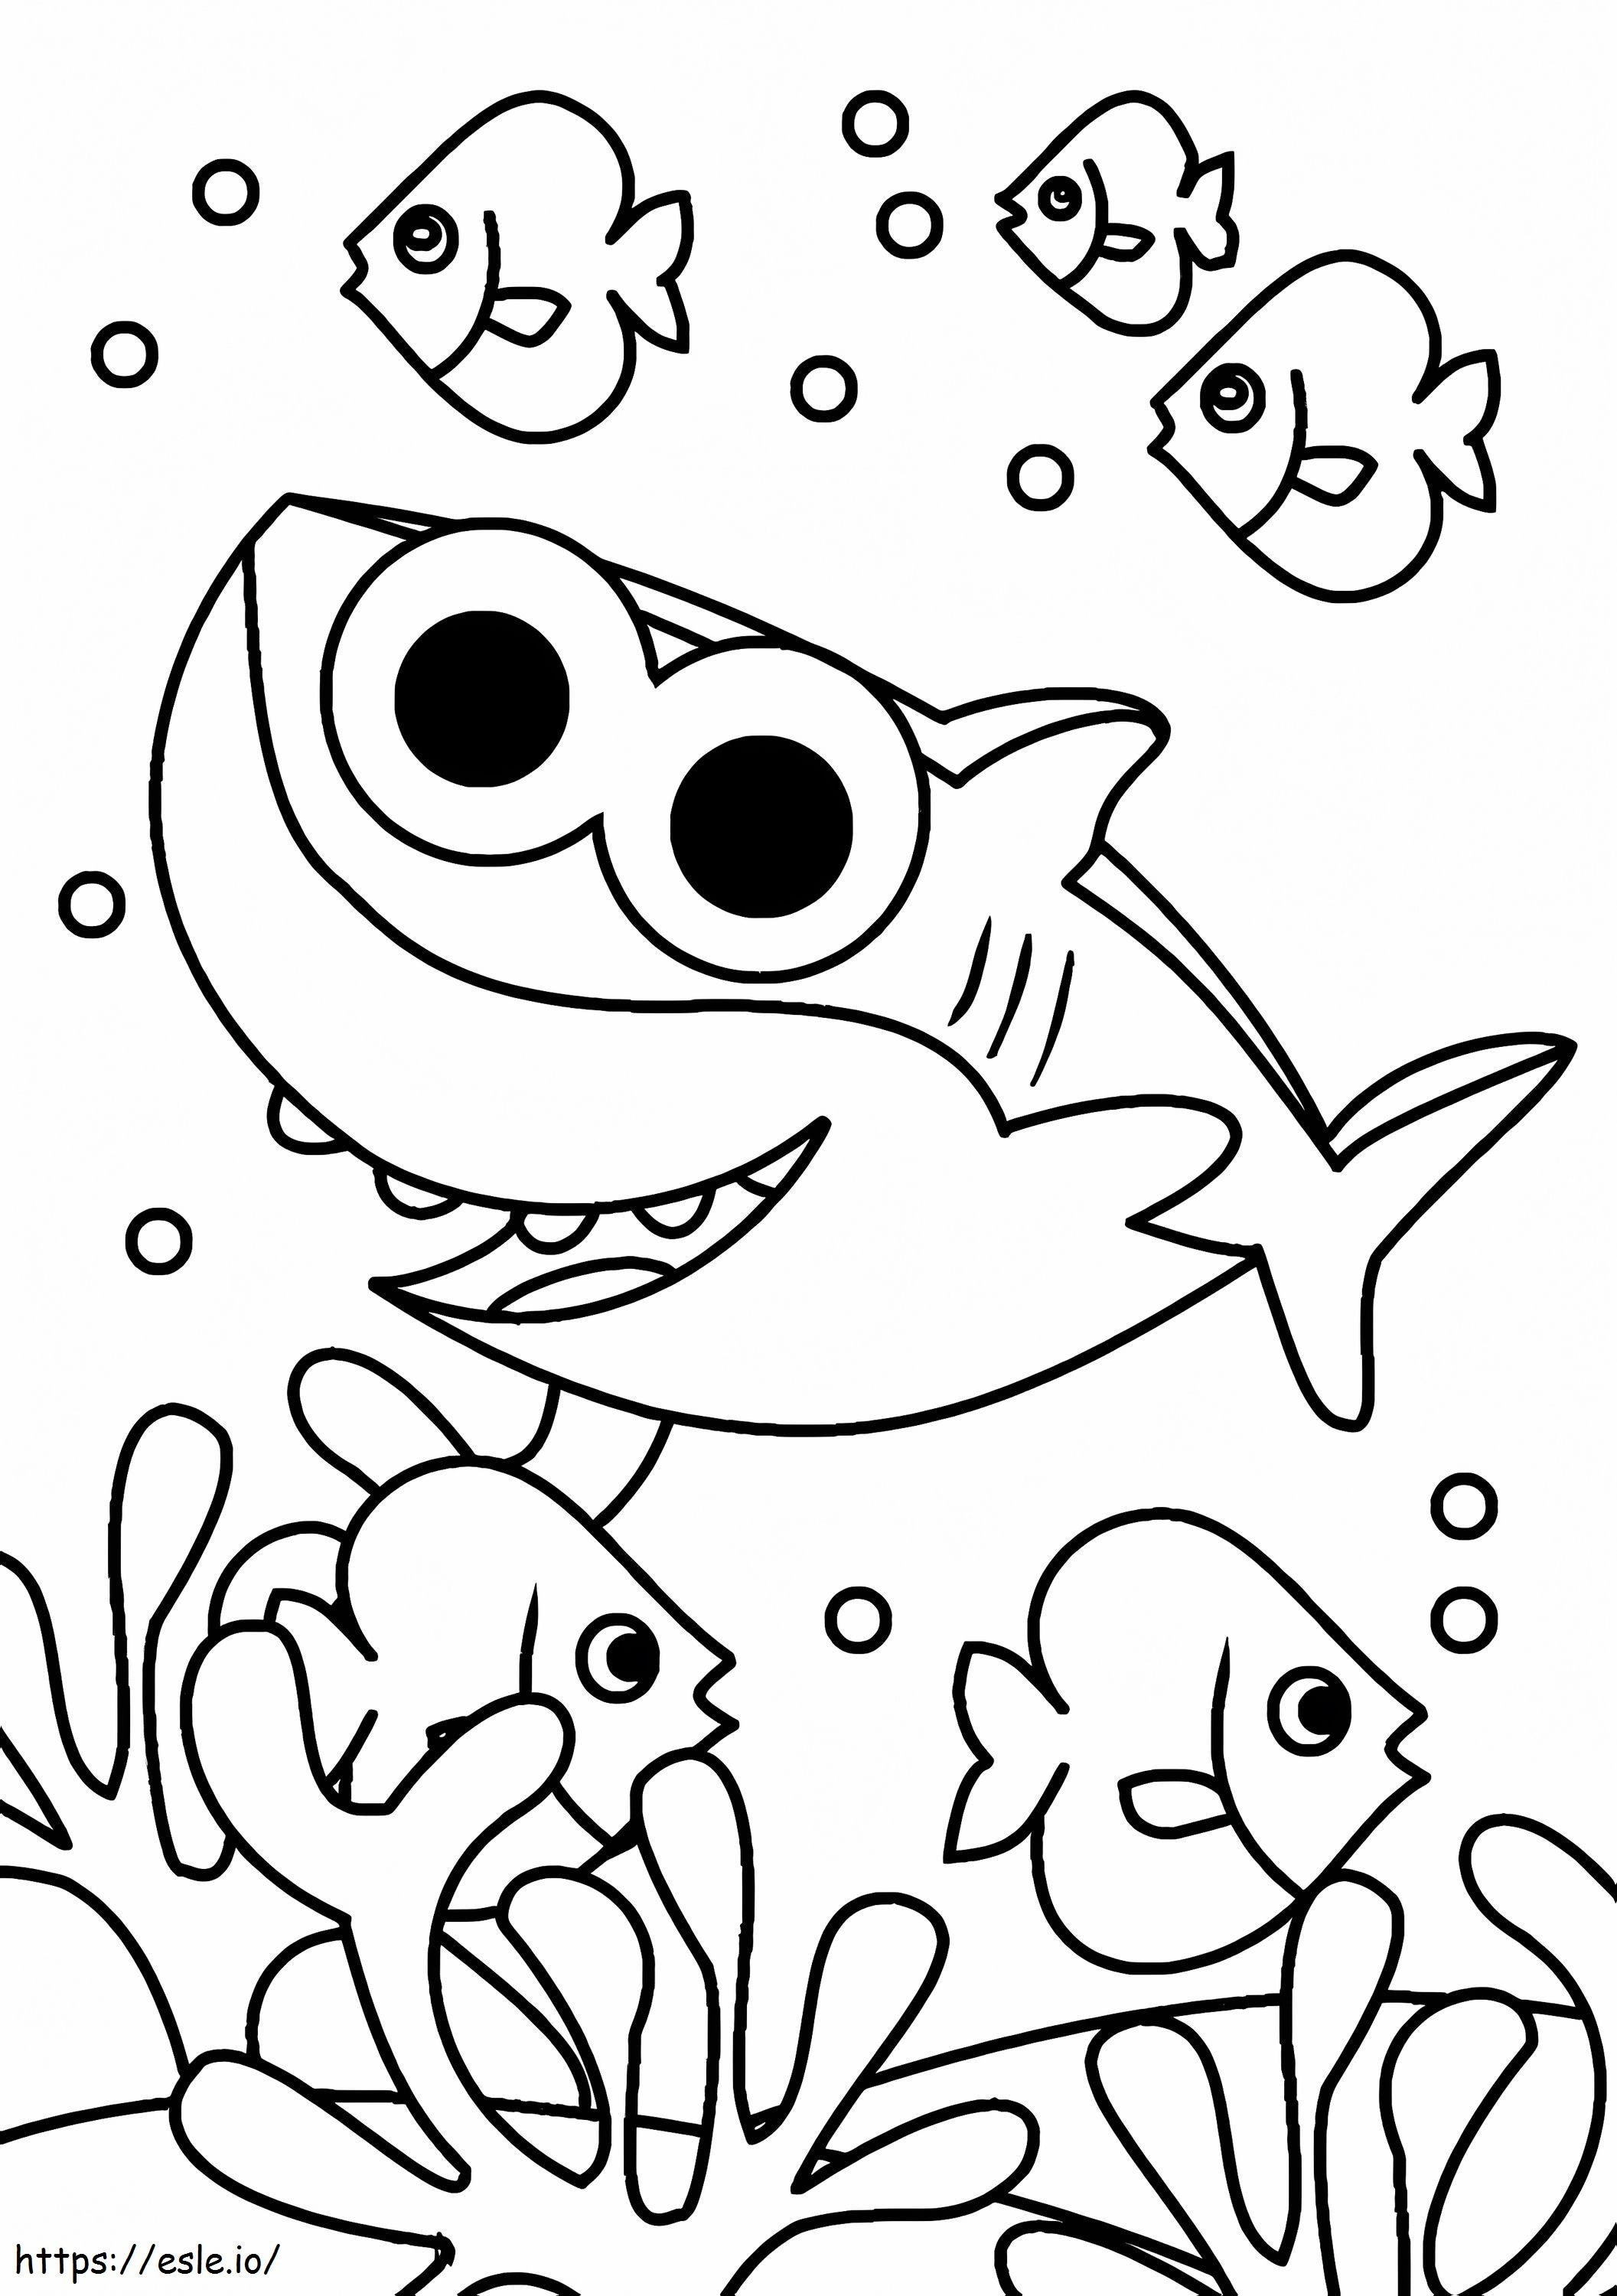 Adorable Baby Shark coloring page